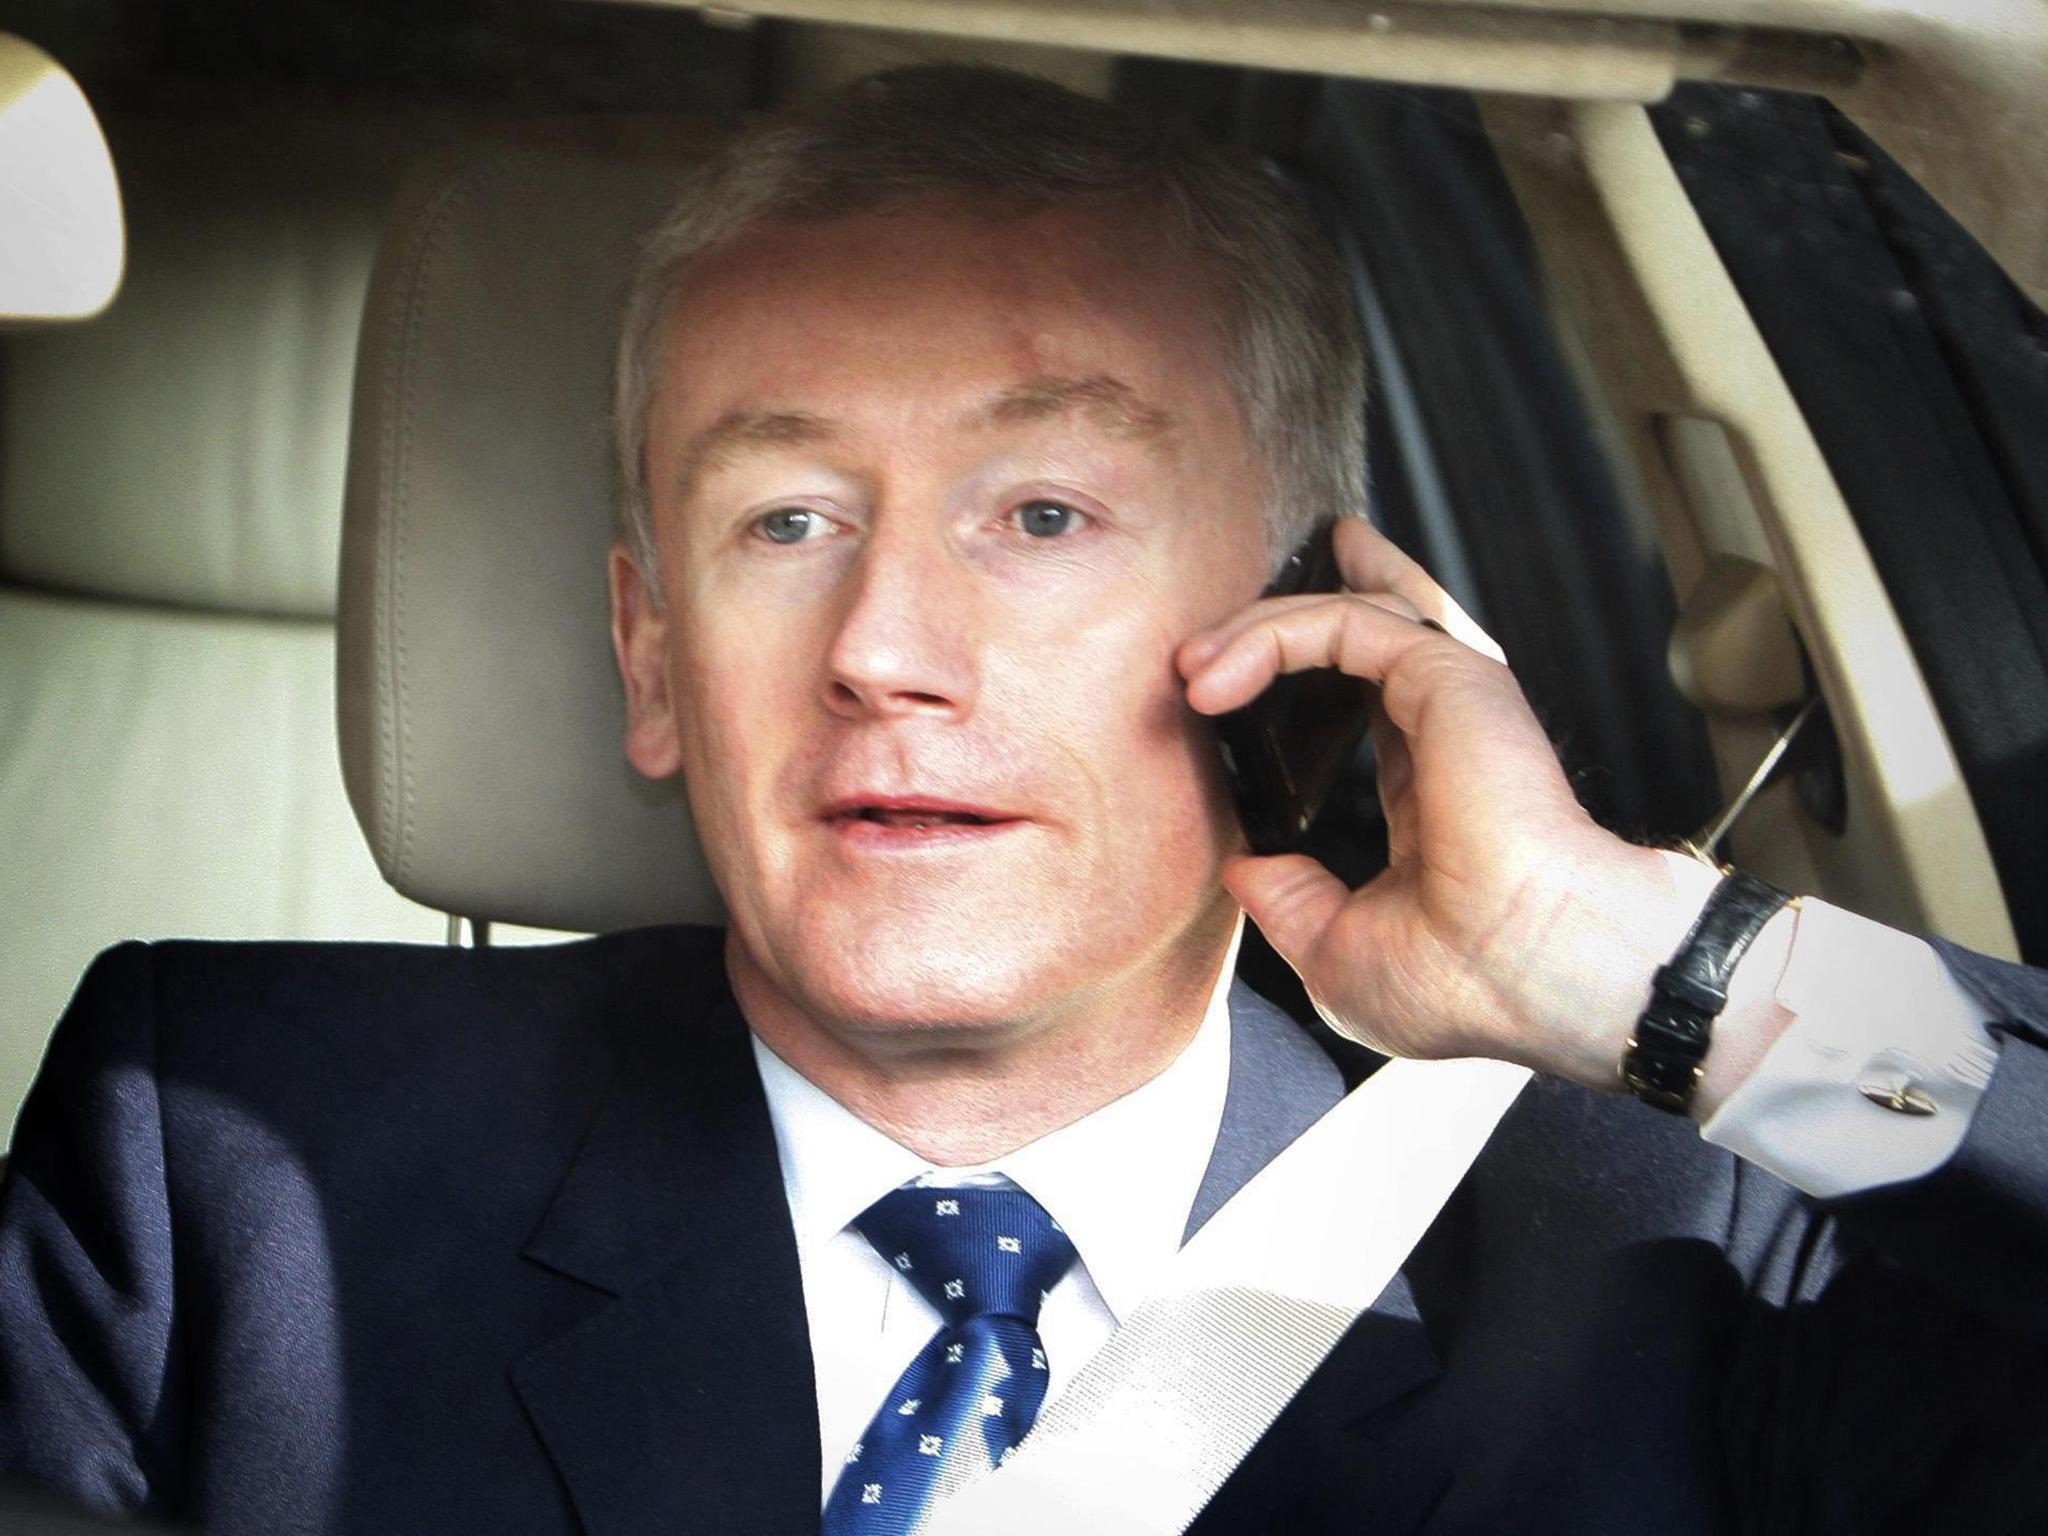 Former RBS chief executive Fred Goodwin has so far endured no legal or regulatory sanction for the role he played in the near death of the bank